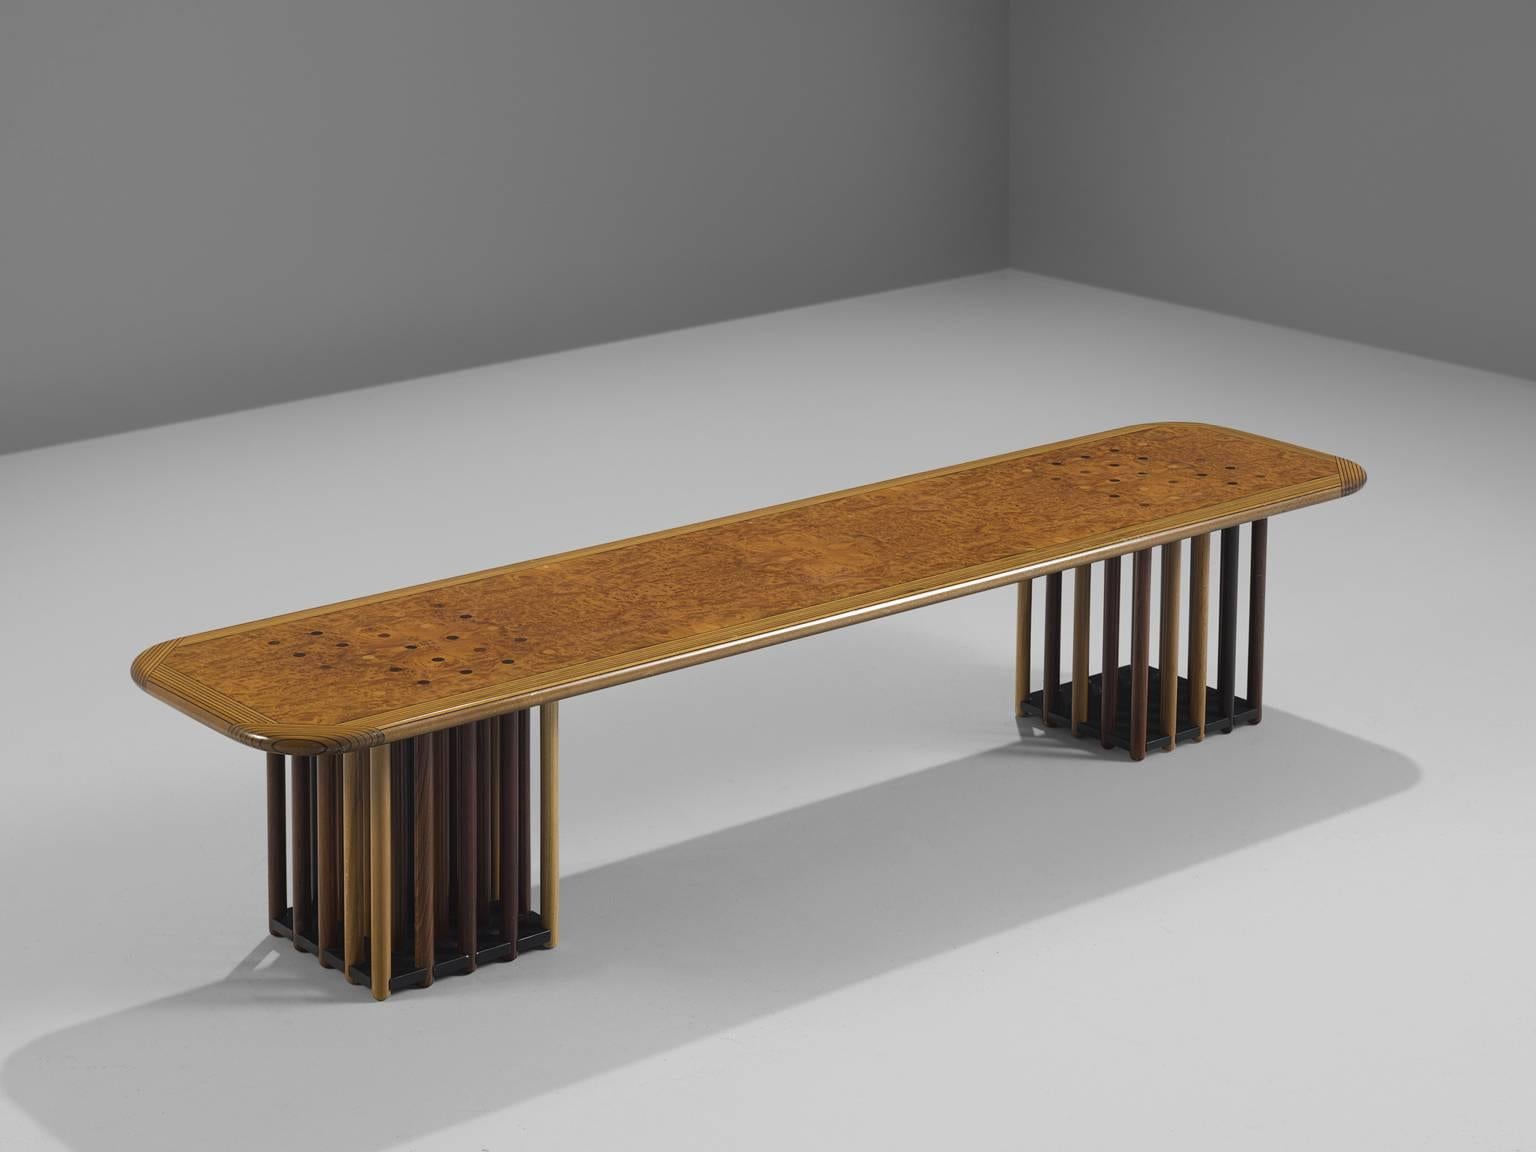 Coffee table by Afra Scarpa and Tobia Scarpa, maple burl, birch, beech, oak, fruitwood, Italy, circa 1975

This extraordinary long table features two feet that exist of circular rods made out of different types of wood. The ends of the circular